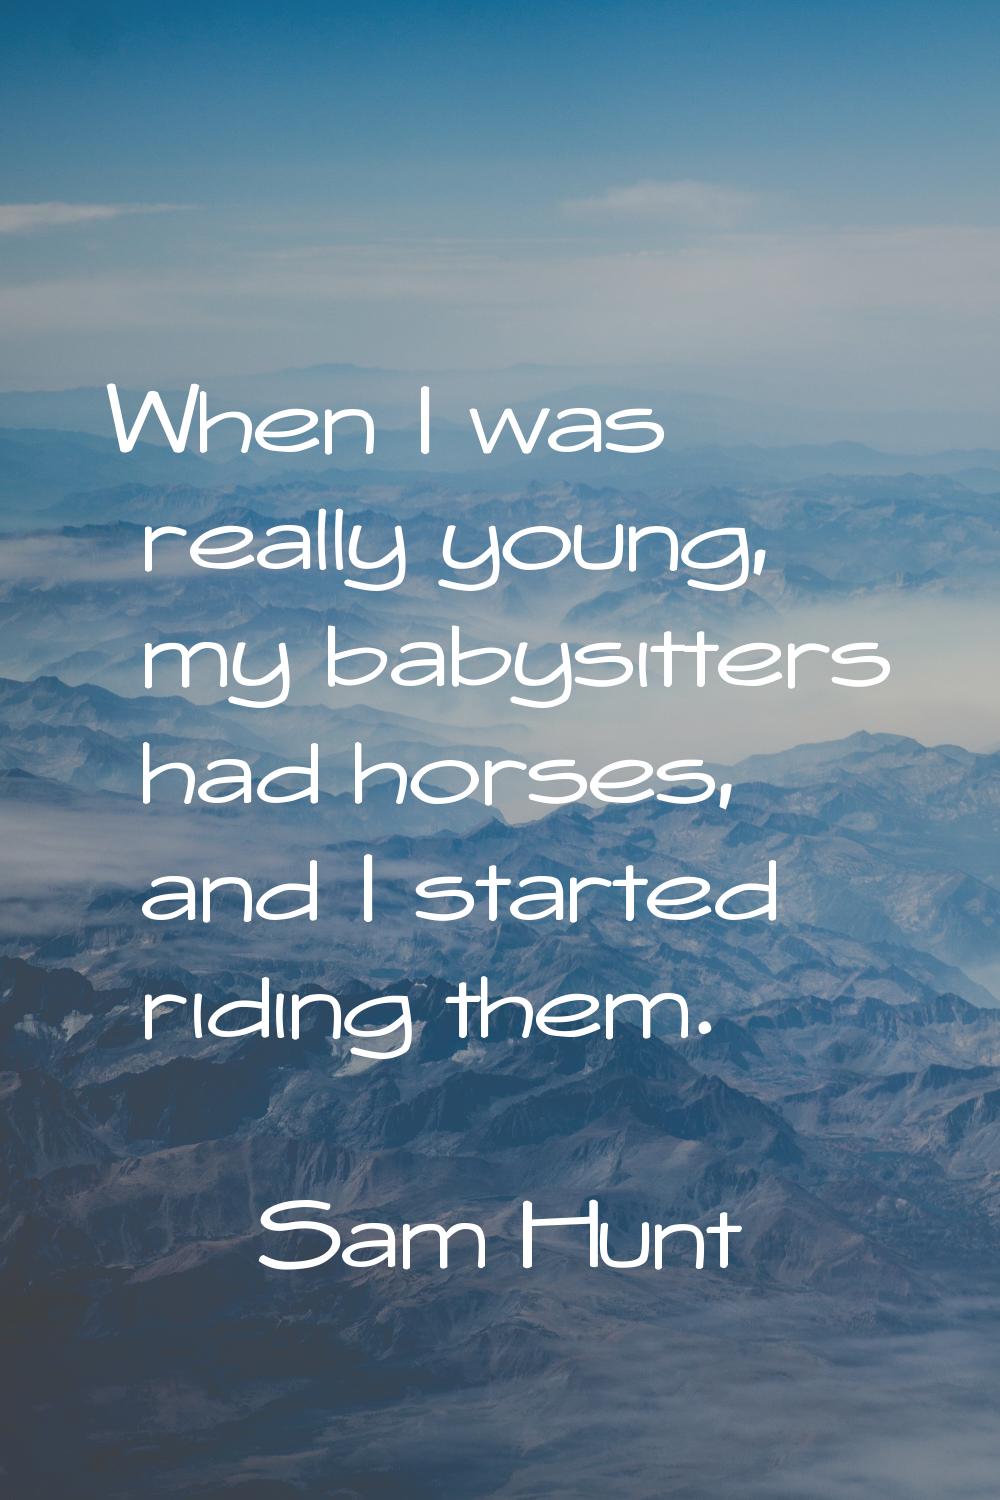 When I was really young, my babysitters had horses, and I started riding them.